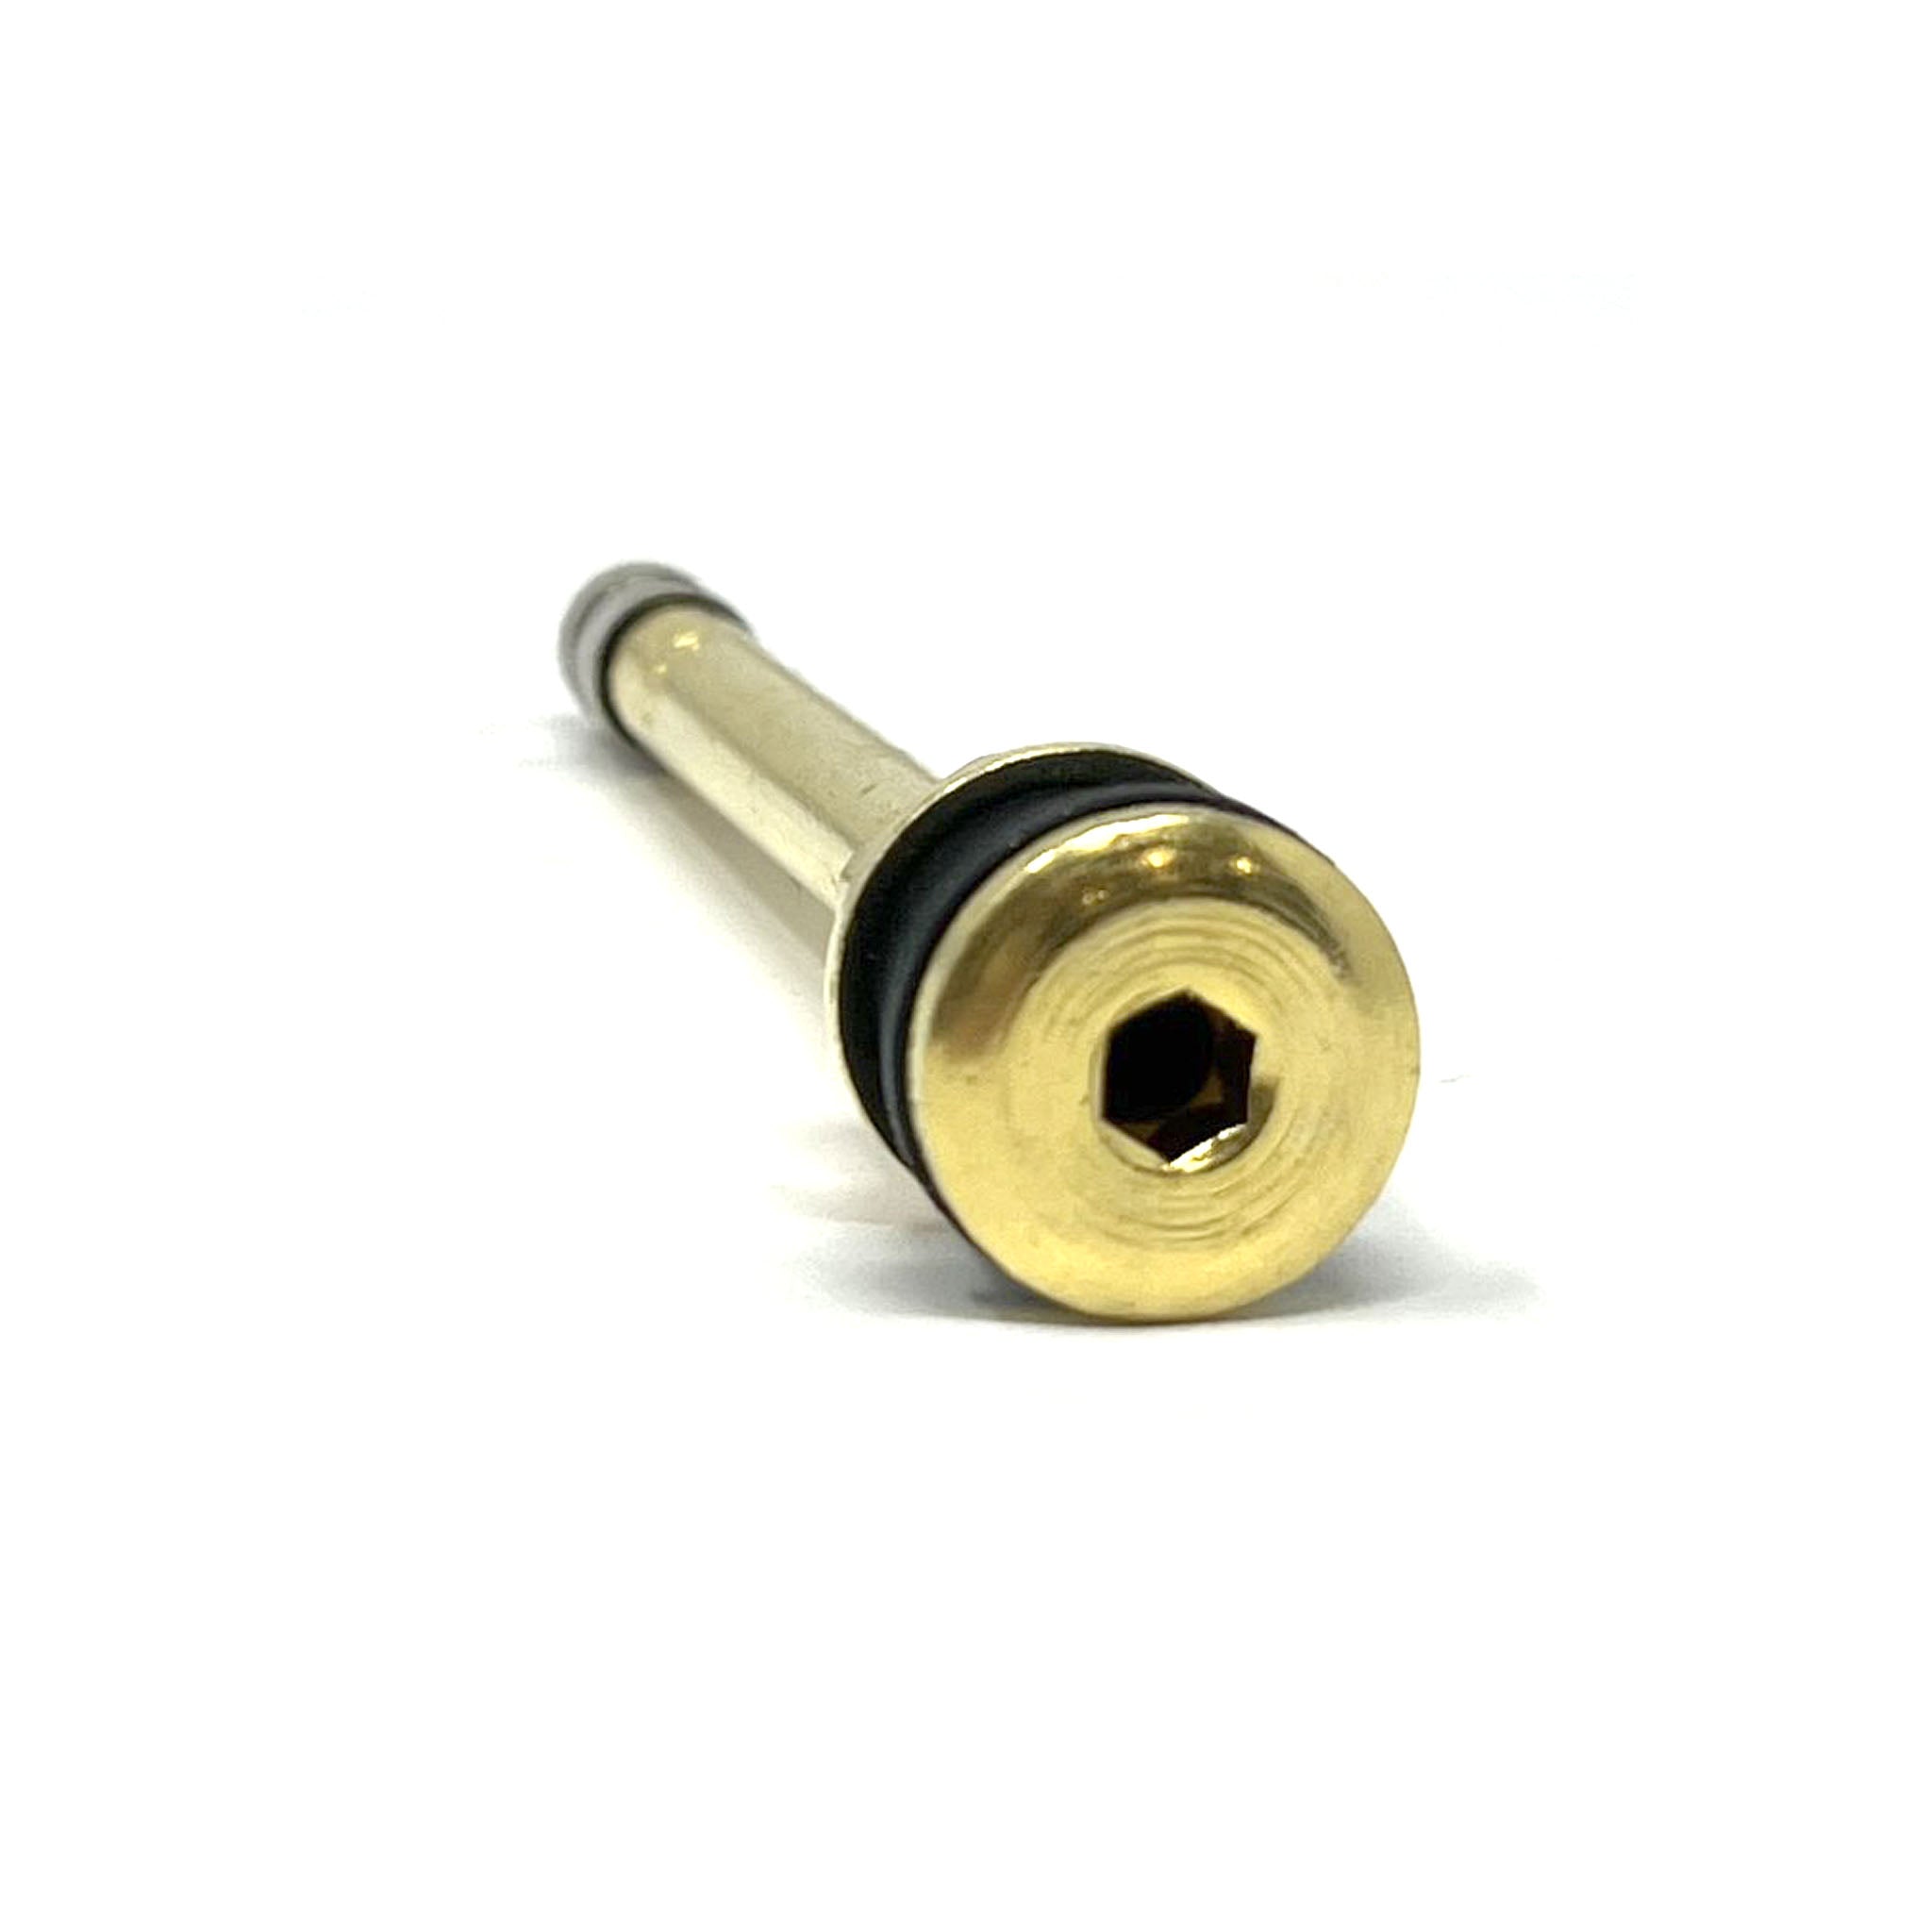 TR572 Truck and Bus Tire Valve, 0.625" rim hole, Eff length: 99mm Bag of 50